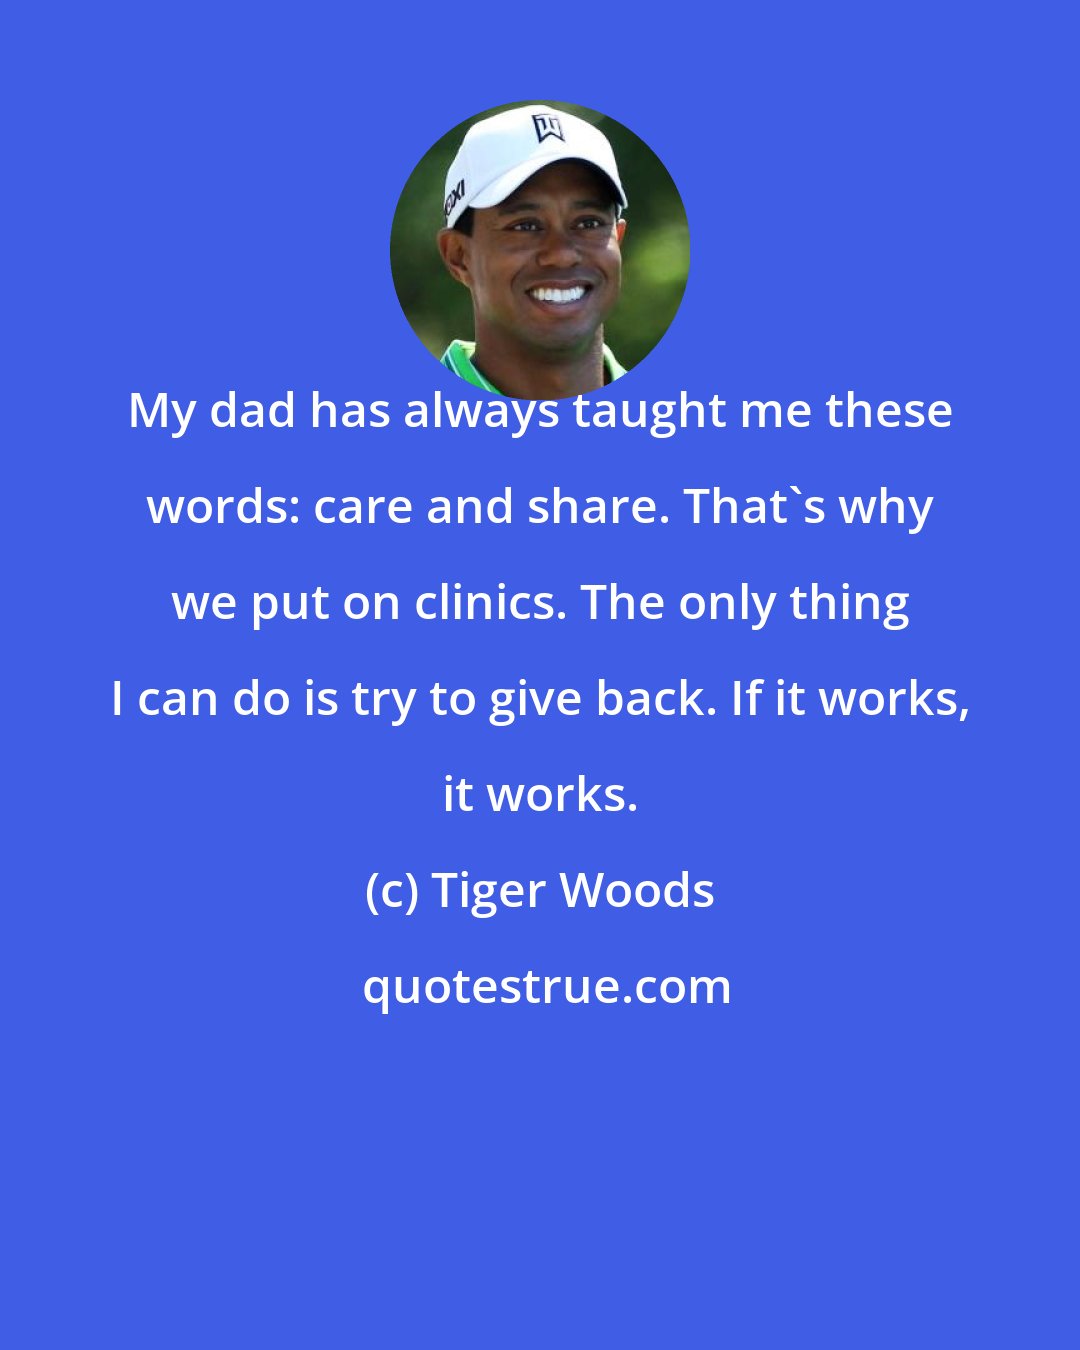 Tiger Woods: My dad has always taught me these words: care and share. That's why we put on clinics. The only thing I can do is try to give back. If it works, it works.